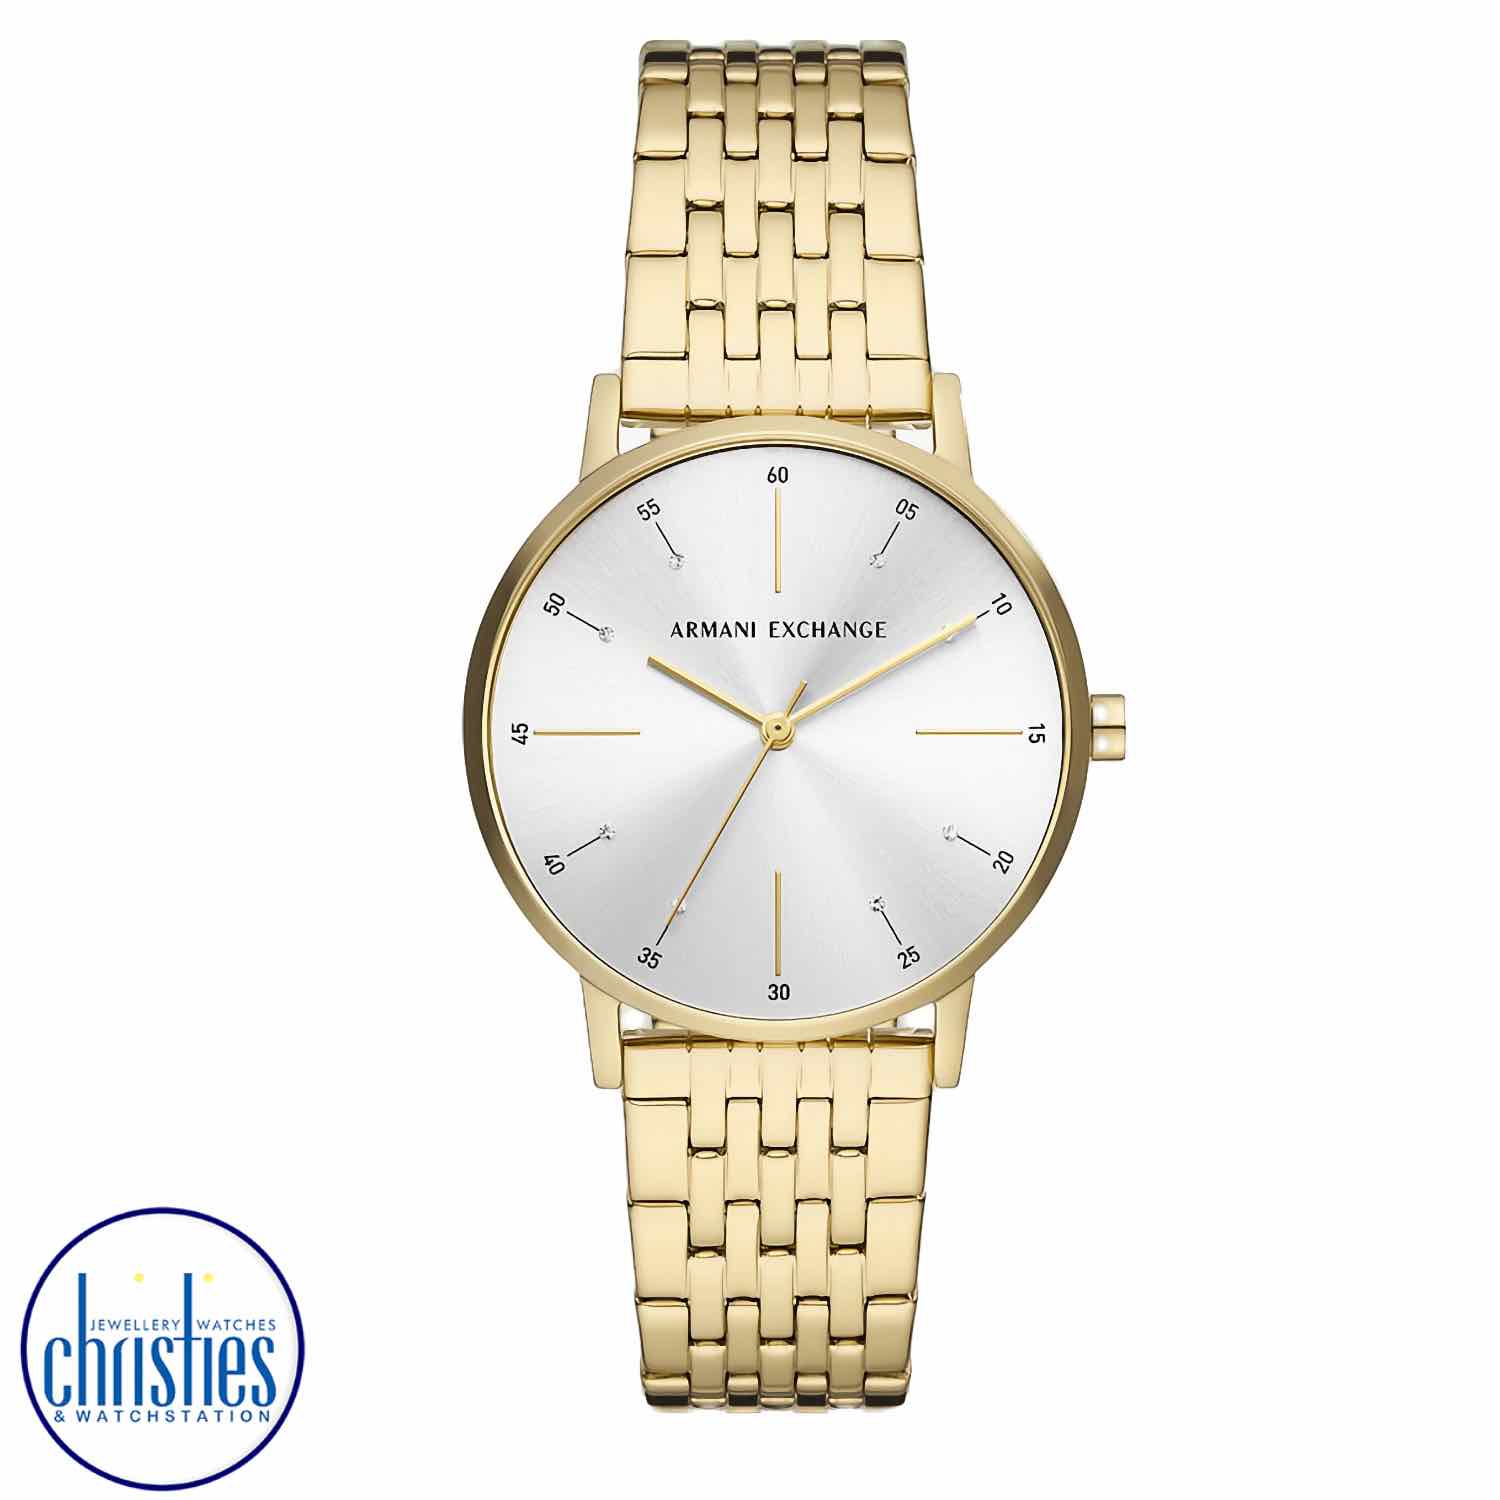 AX5579 A|X Armani Exchange Gold Tone Watch. AX5579 A|X Armani Exchange Three-Hand Gold Tone WatchAfterpay - Split your purchase into 4 instalments - Pay for your purchase over 4 instalments, due every two weeks.